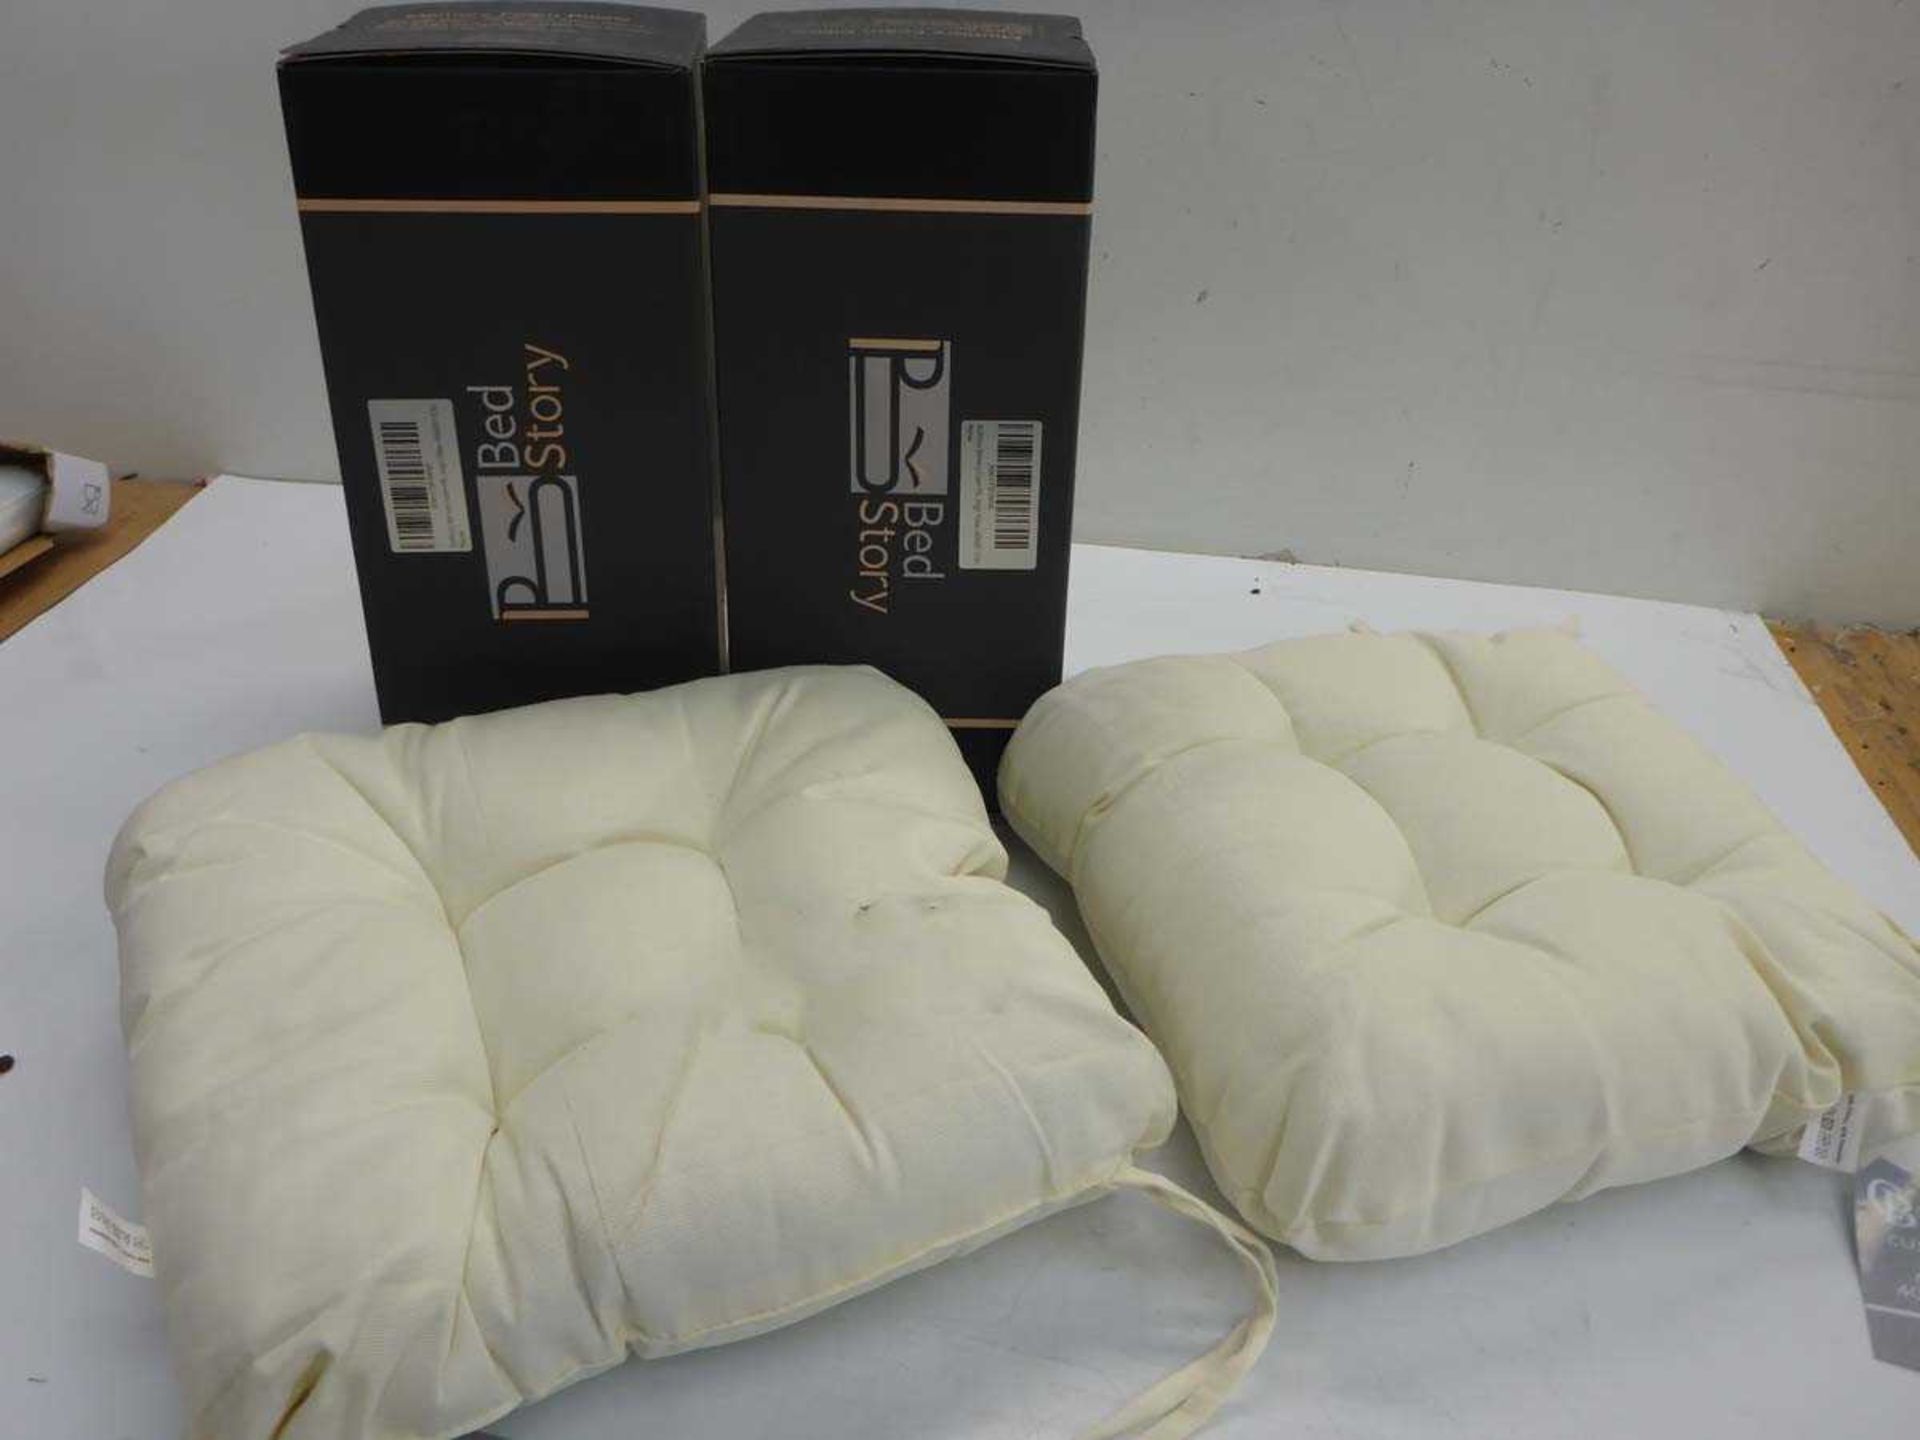 +VAT 2 x Bedstory memory foam pillows and 2 tie on chair cushions